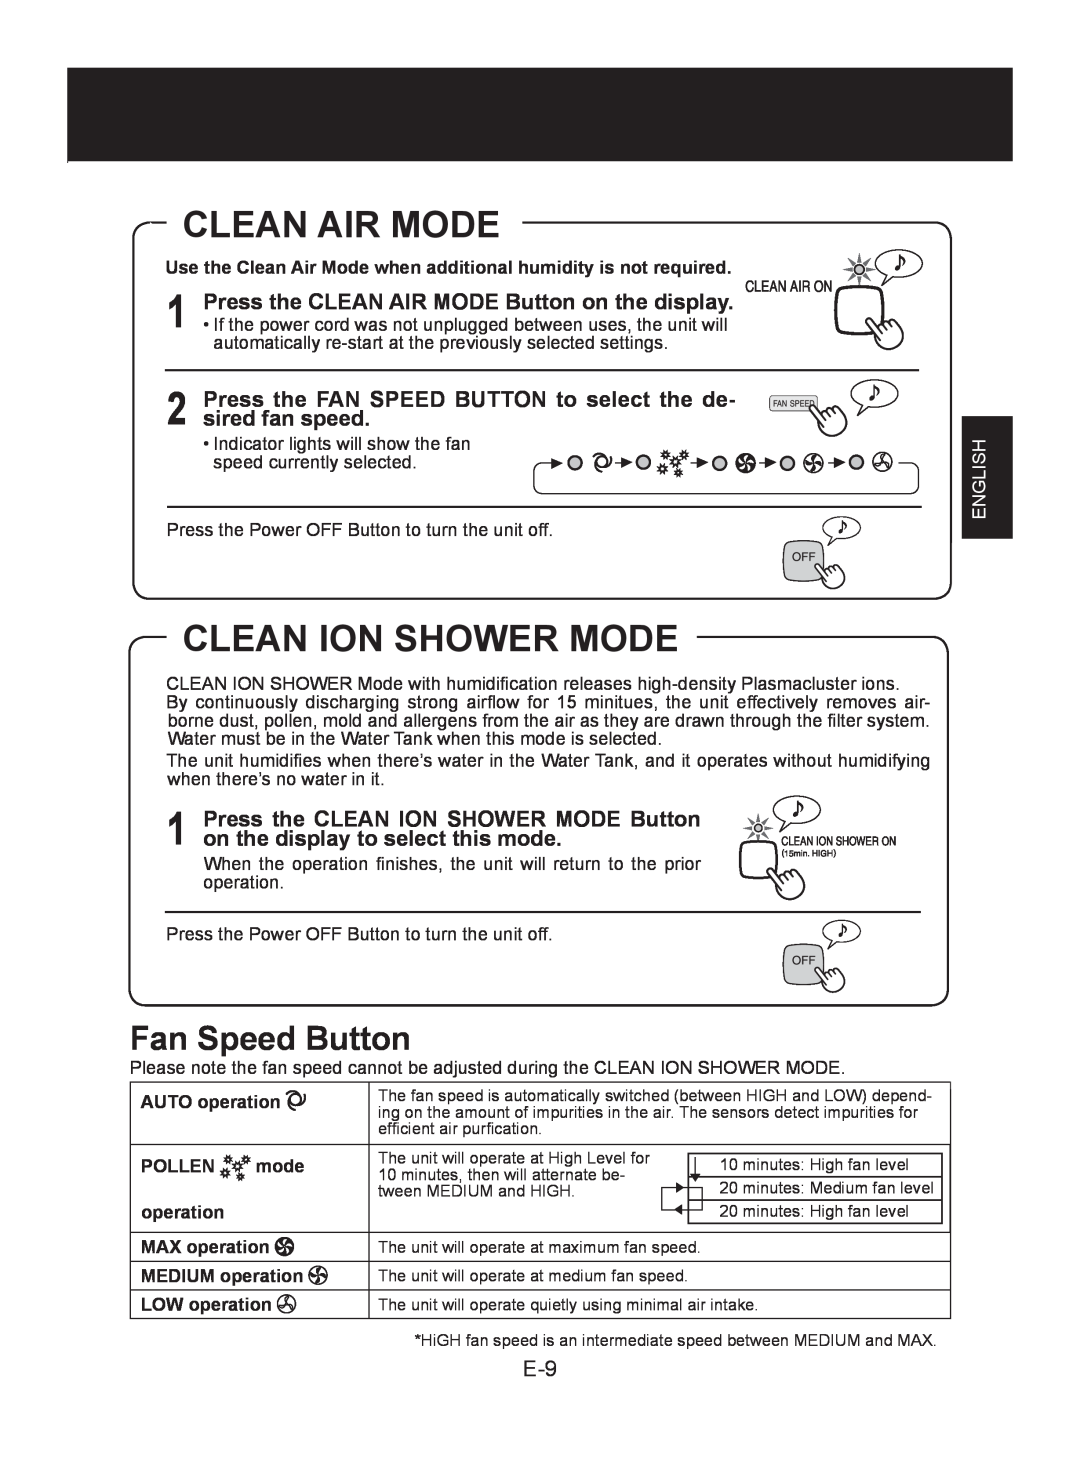 Sharp KC-850E Clean Air Mode, Clean Ion Shower Mode, Fan Speed Button, Press the CLEAN AIR MODE Button on the display 